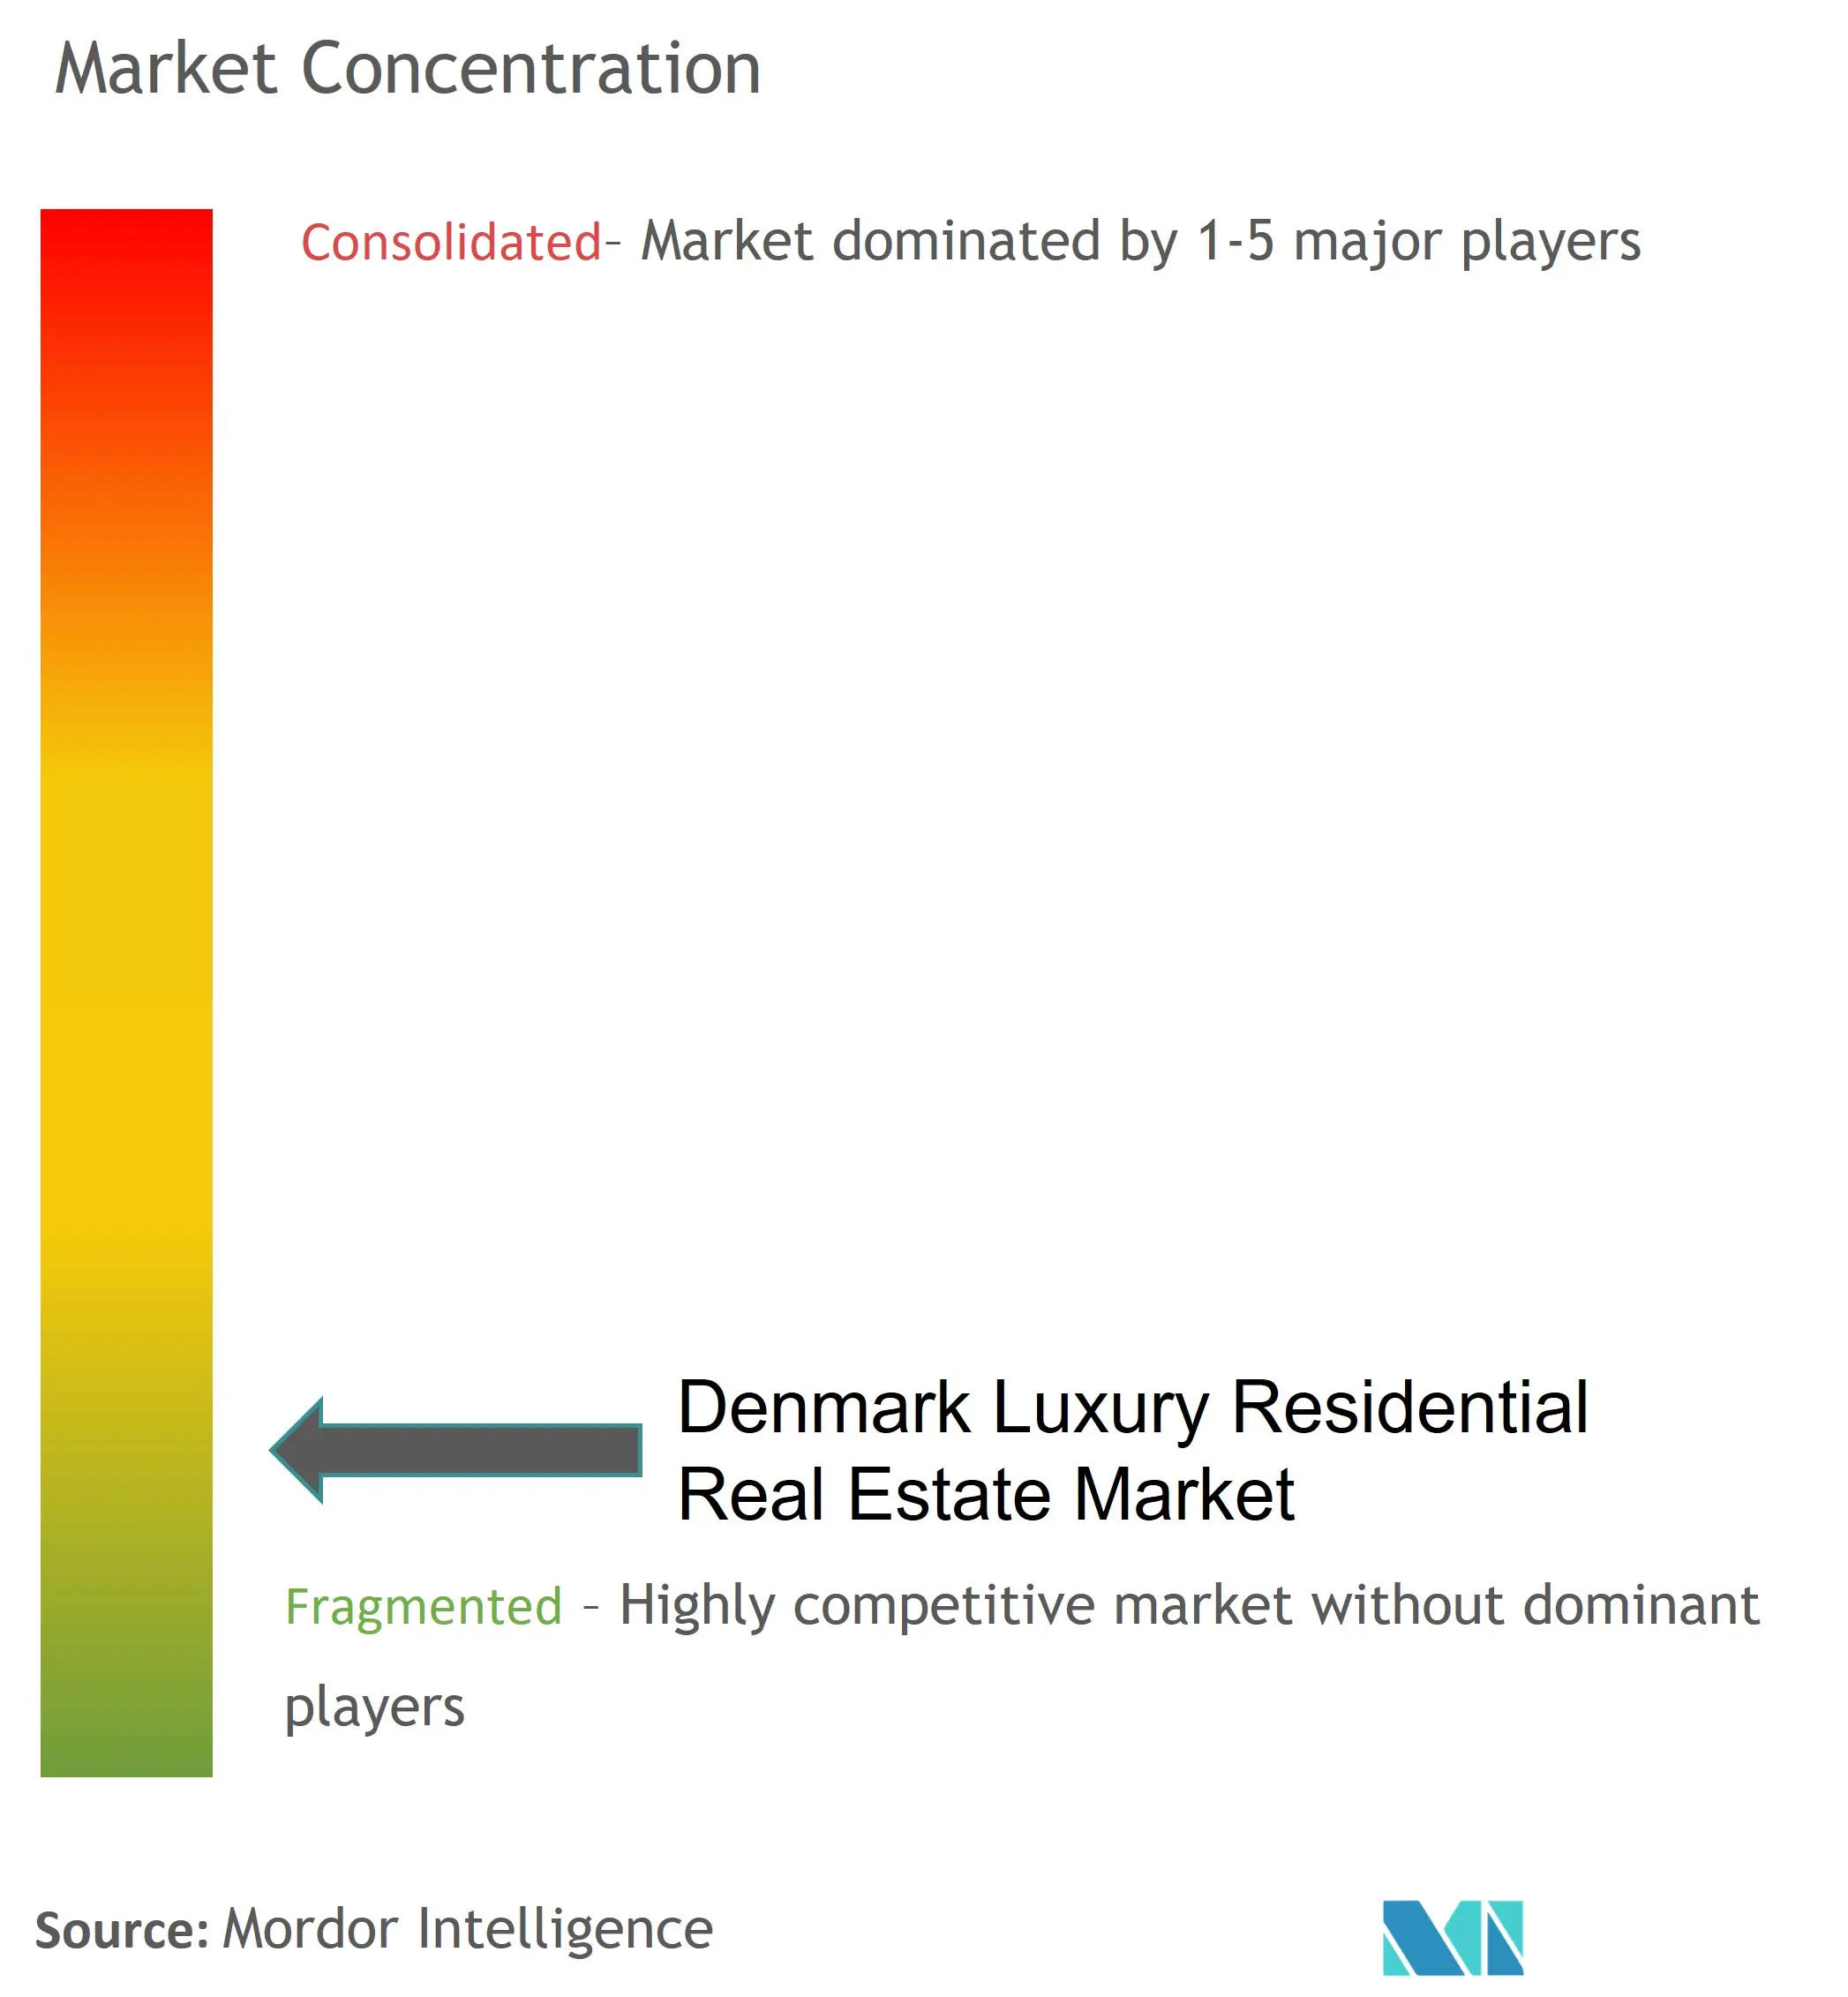 Denmark Luxury Residential Real Estate Market Concentration